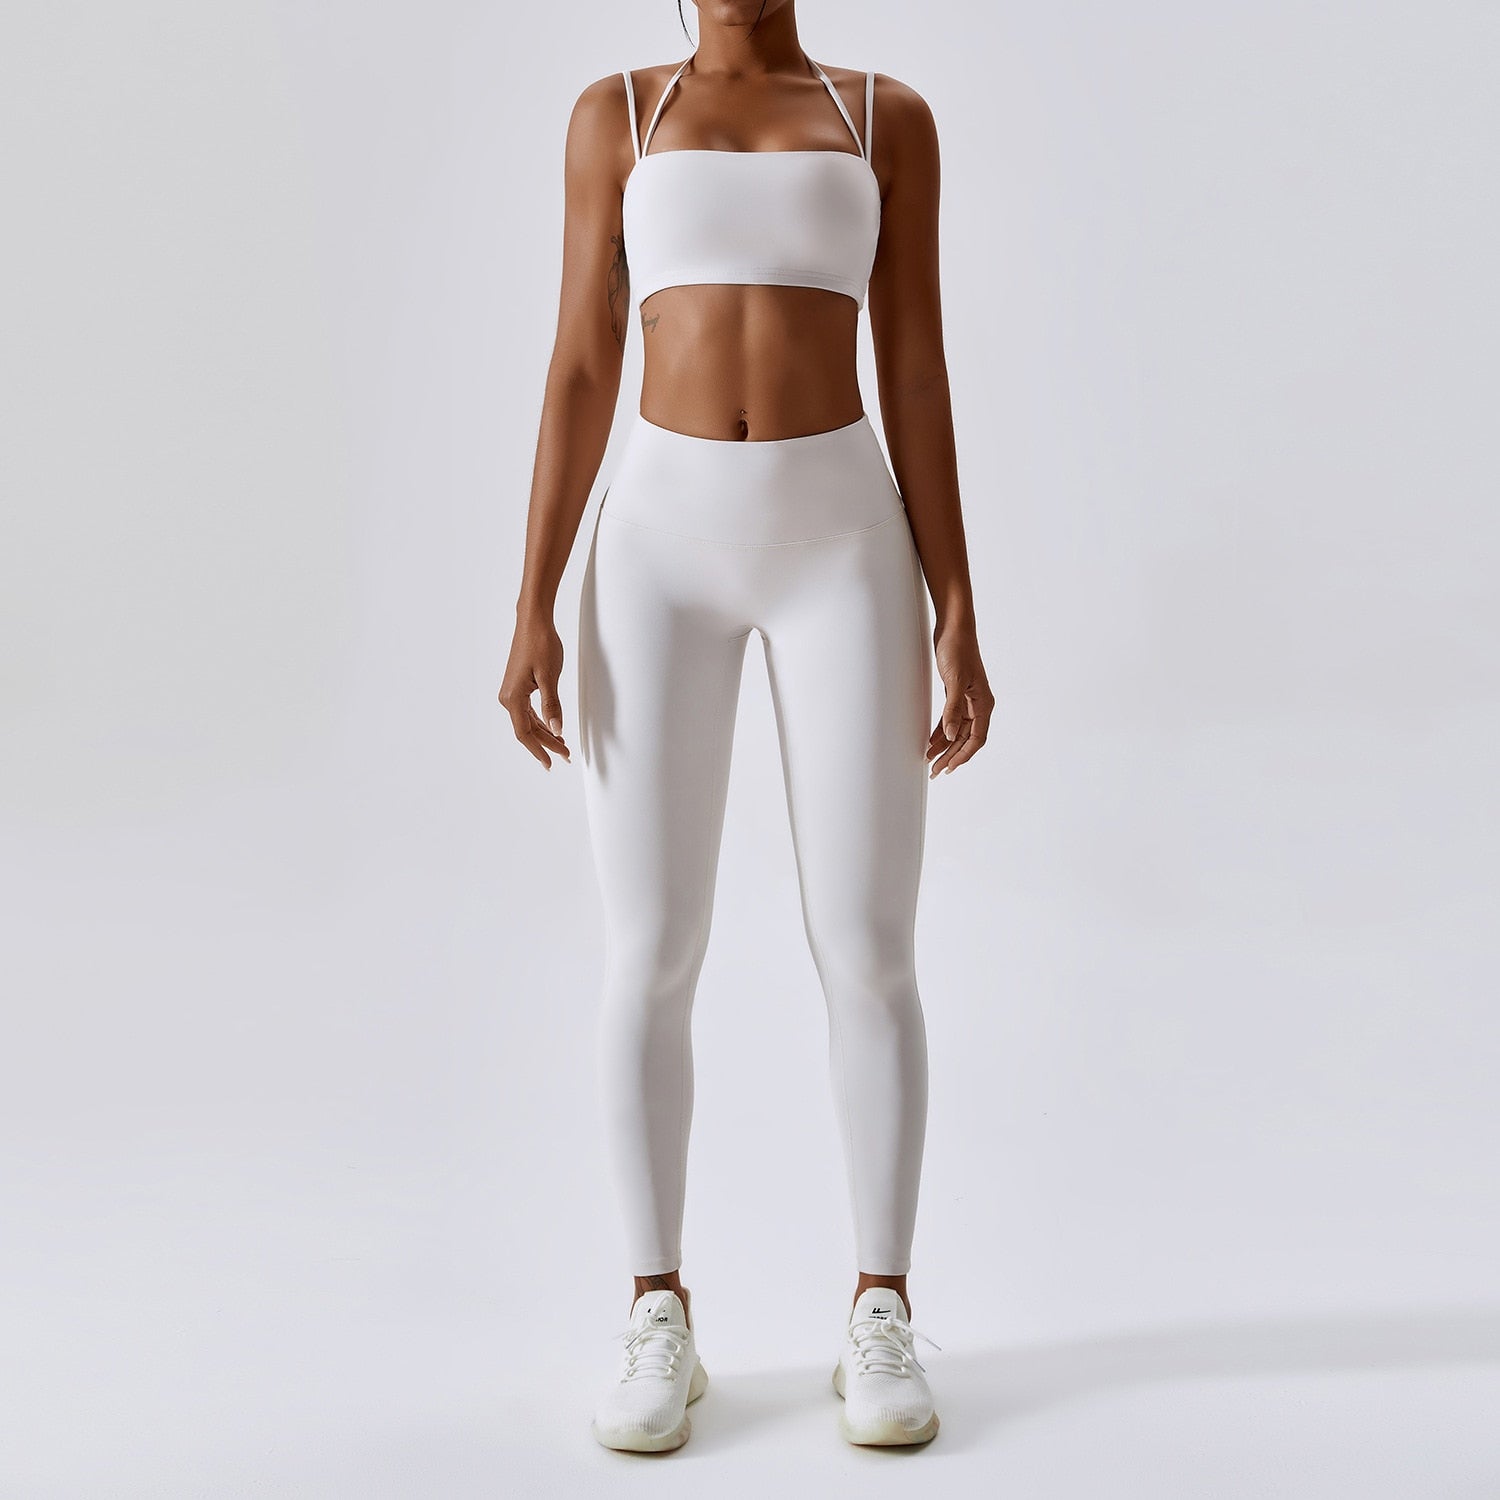 Ember Set - Elevate your fitness fashion with this stylish and functional two-piece activewear set. Made from a durable nylon/spandex blend, the set includes a sports bra with removable pads and high-waisted leggings. Stay comfortable, dry, and fashionable during your workout. Order now and ignite your fitness journey!